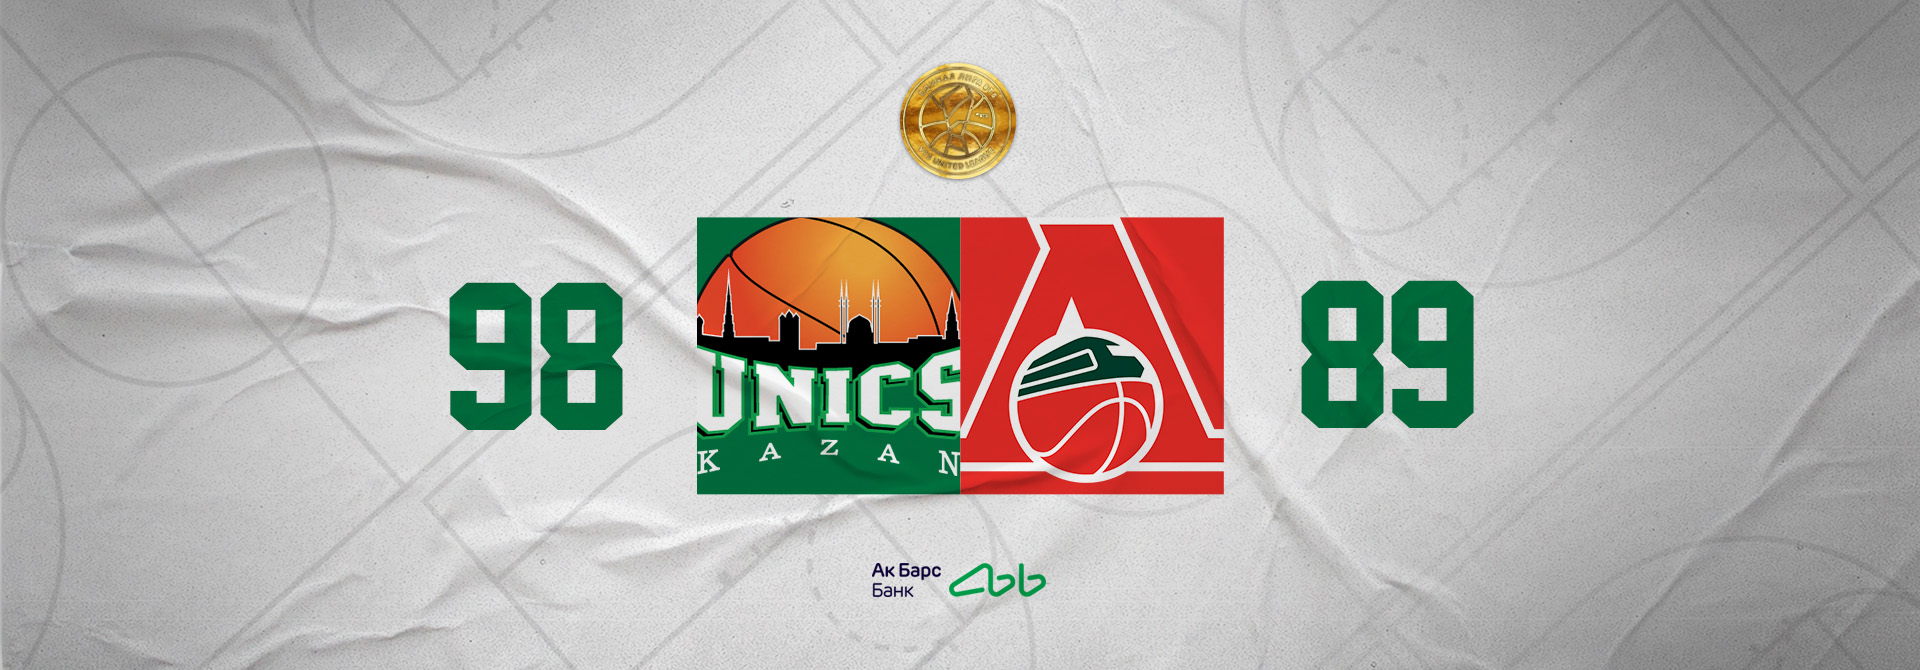 Making history together: UNICS is the strongest club in the country!